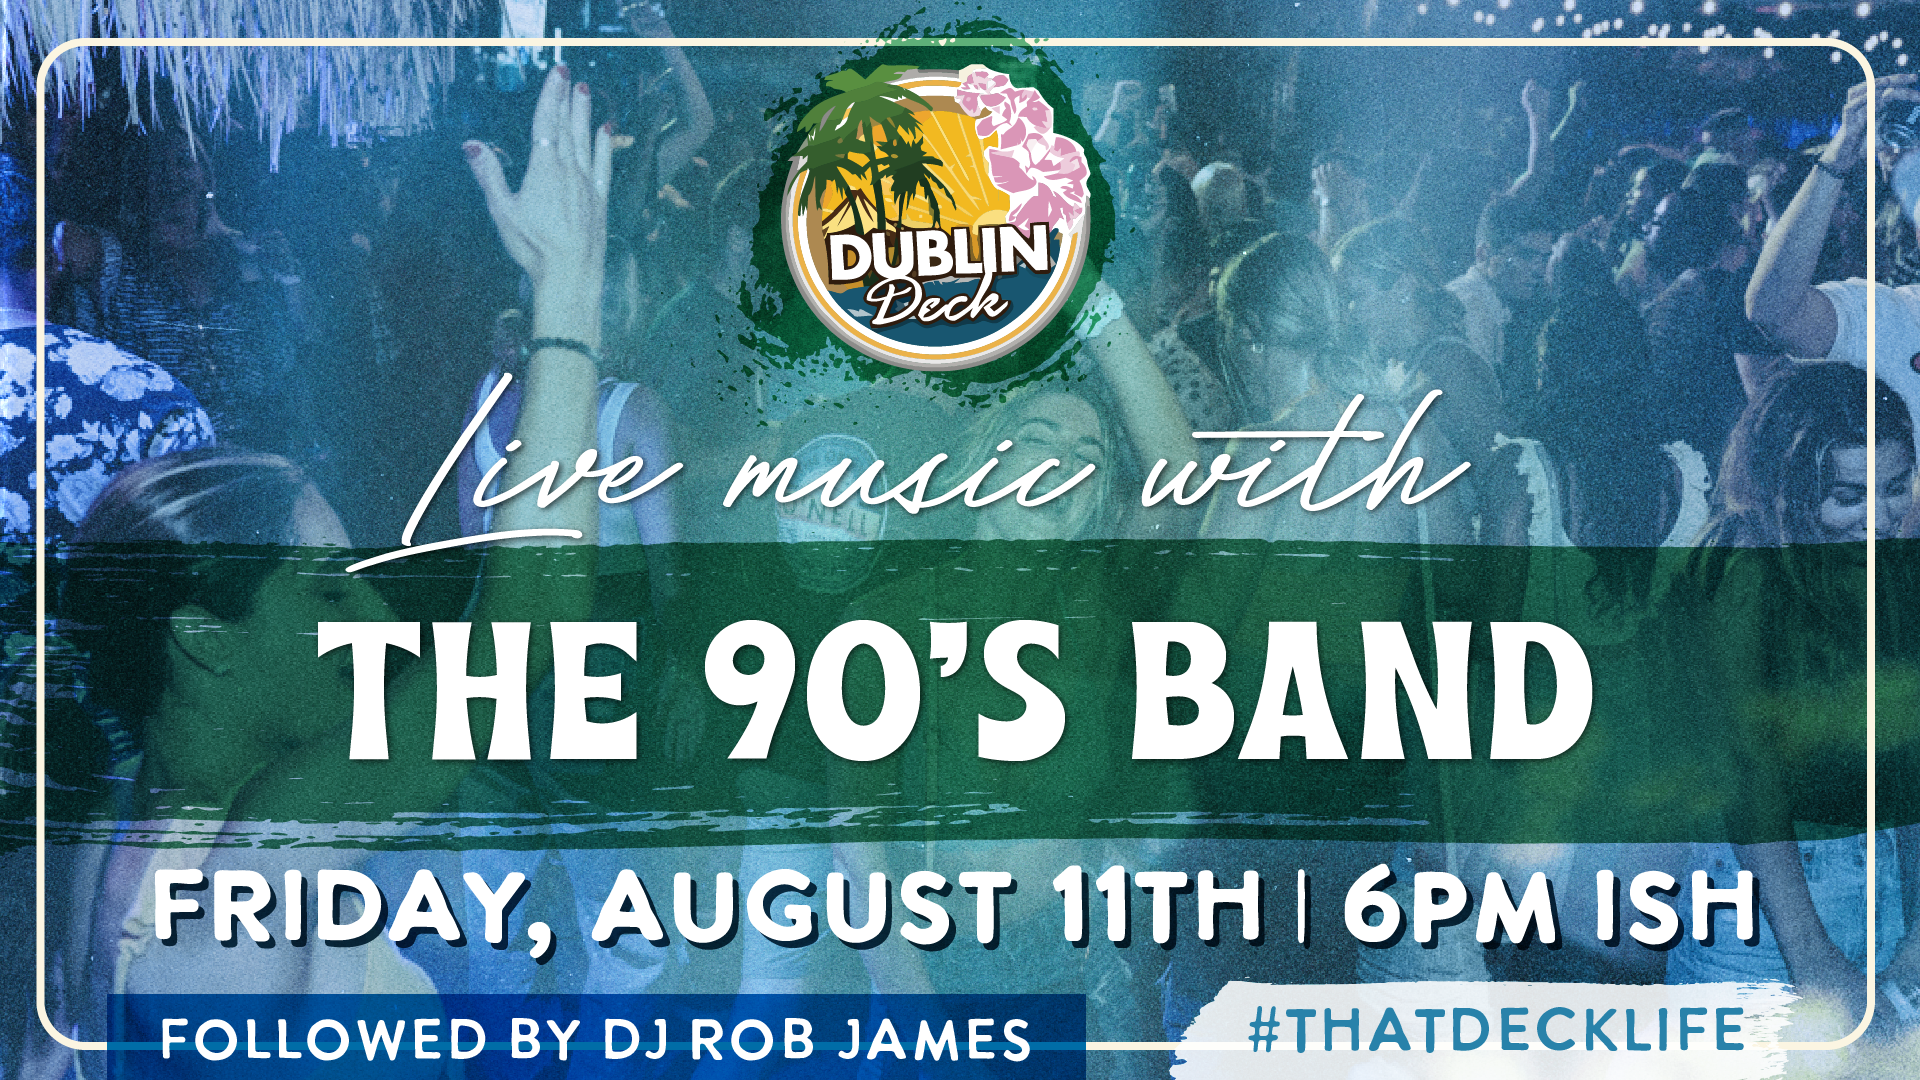 Get your Friday night started with The 90's Band! Music begins at 6PM-ish